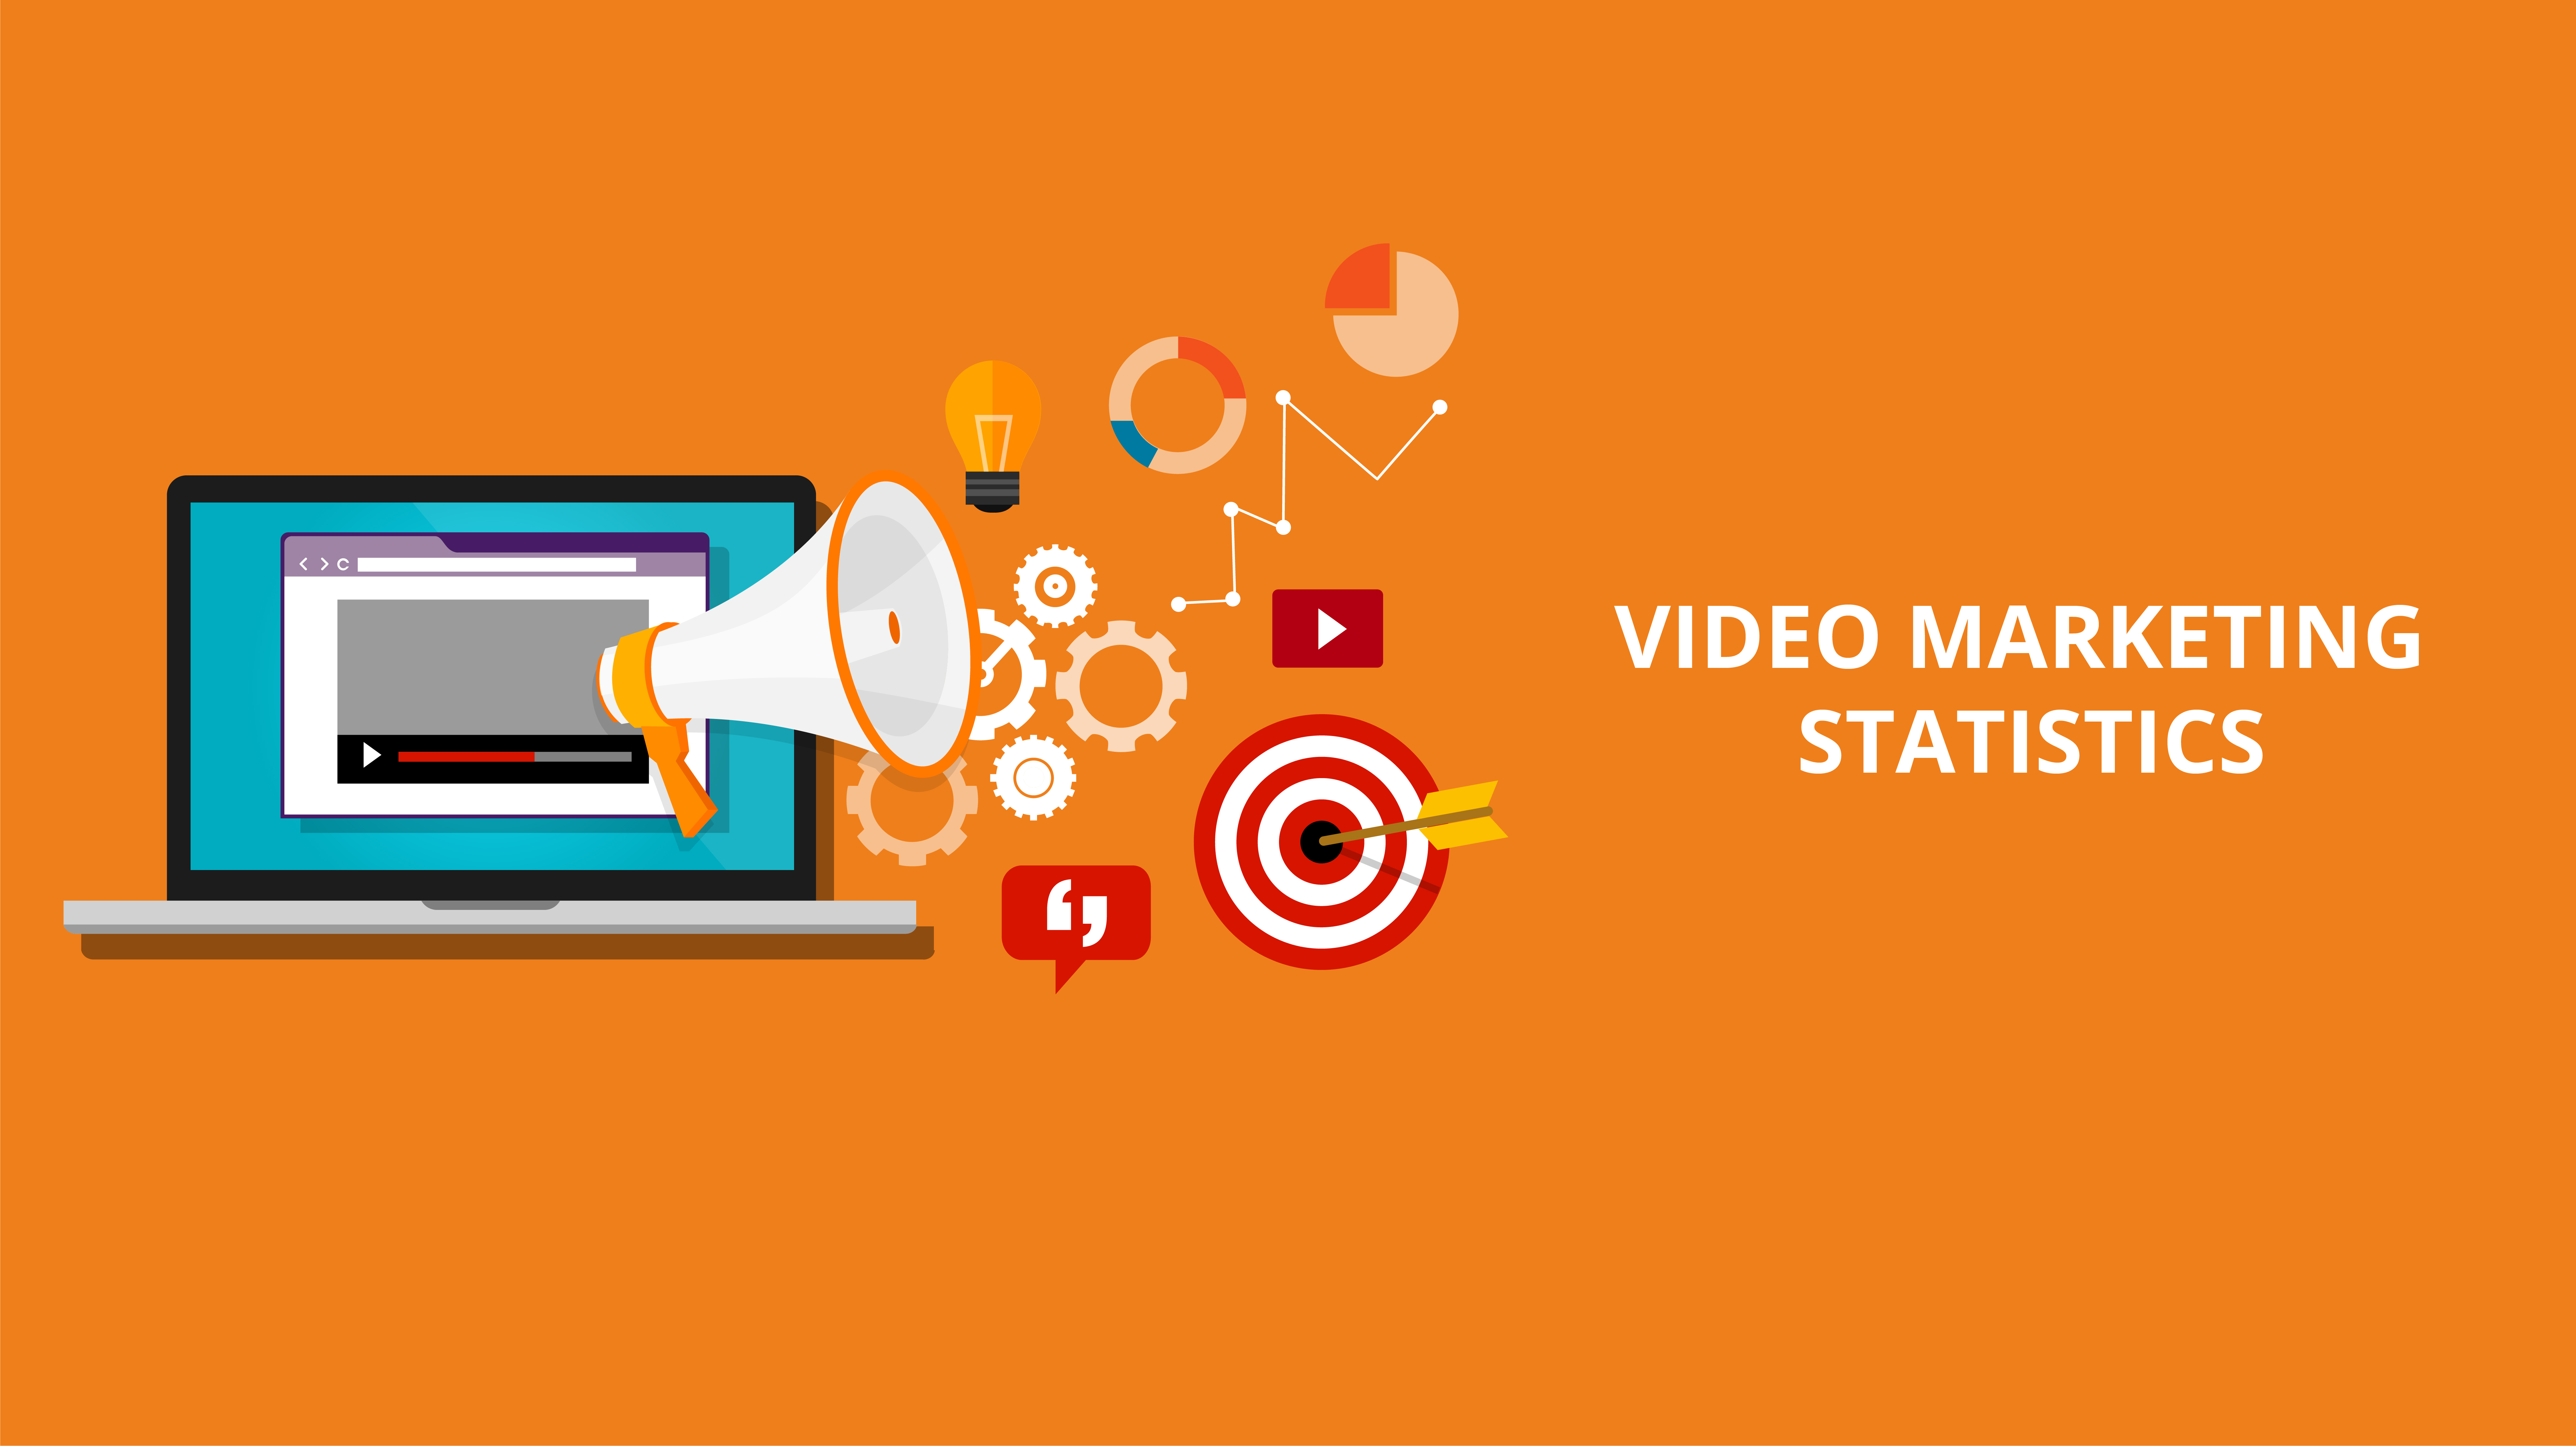 Video marketing statistics that every marketer has to know